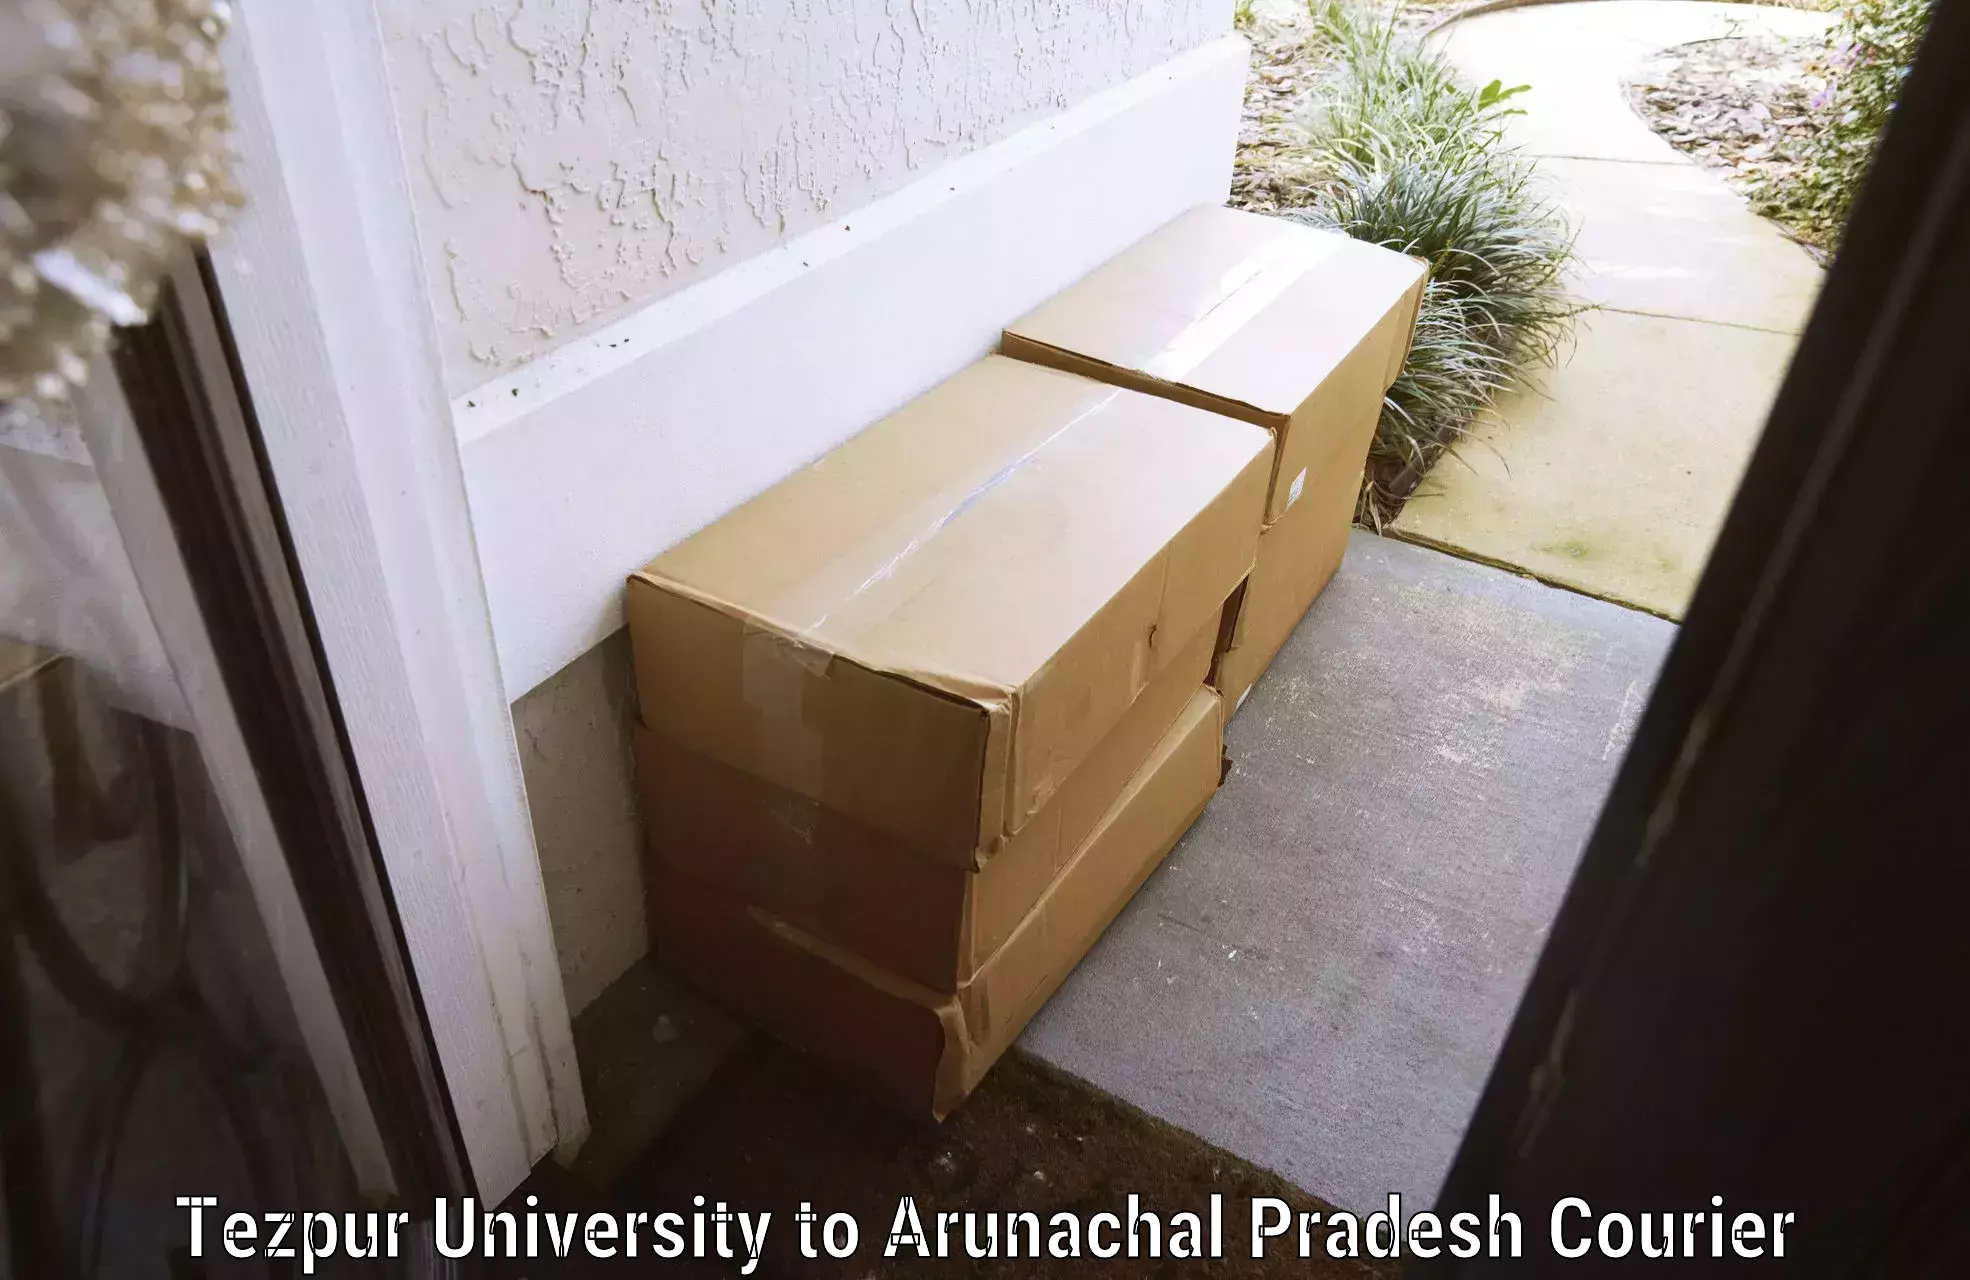 Hassle-free luggage shipping in Tezpur University to Itanagar